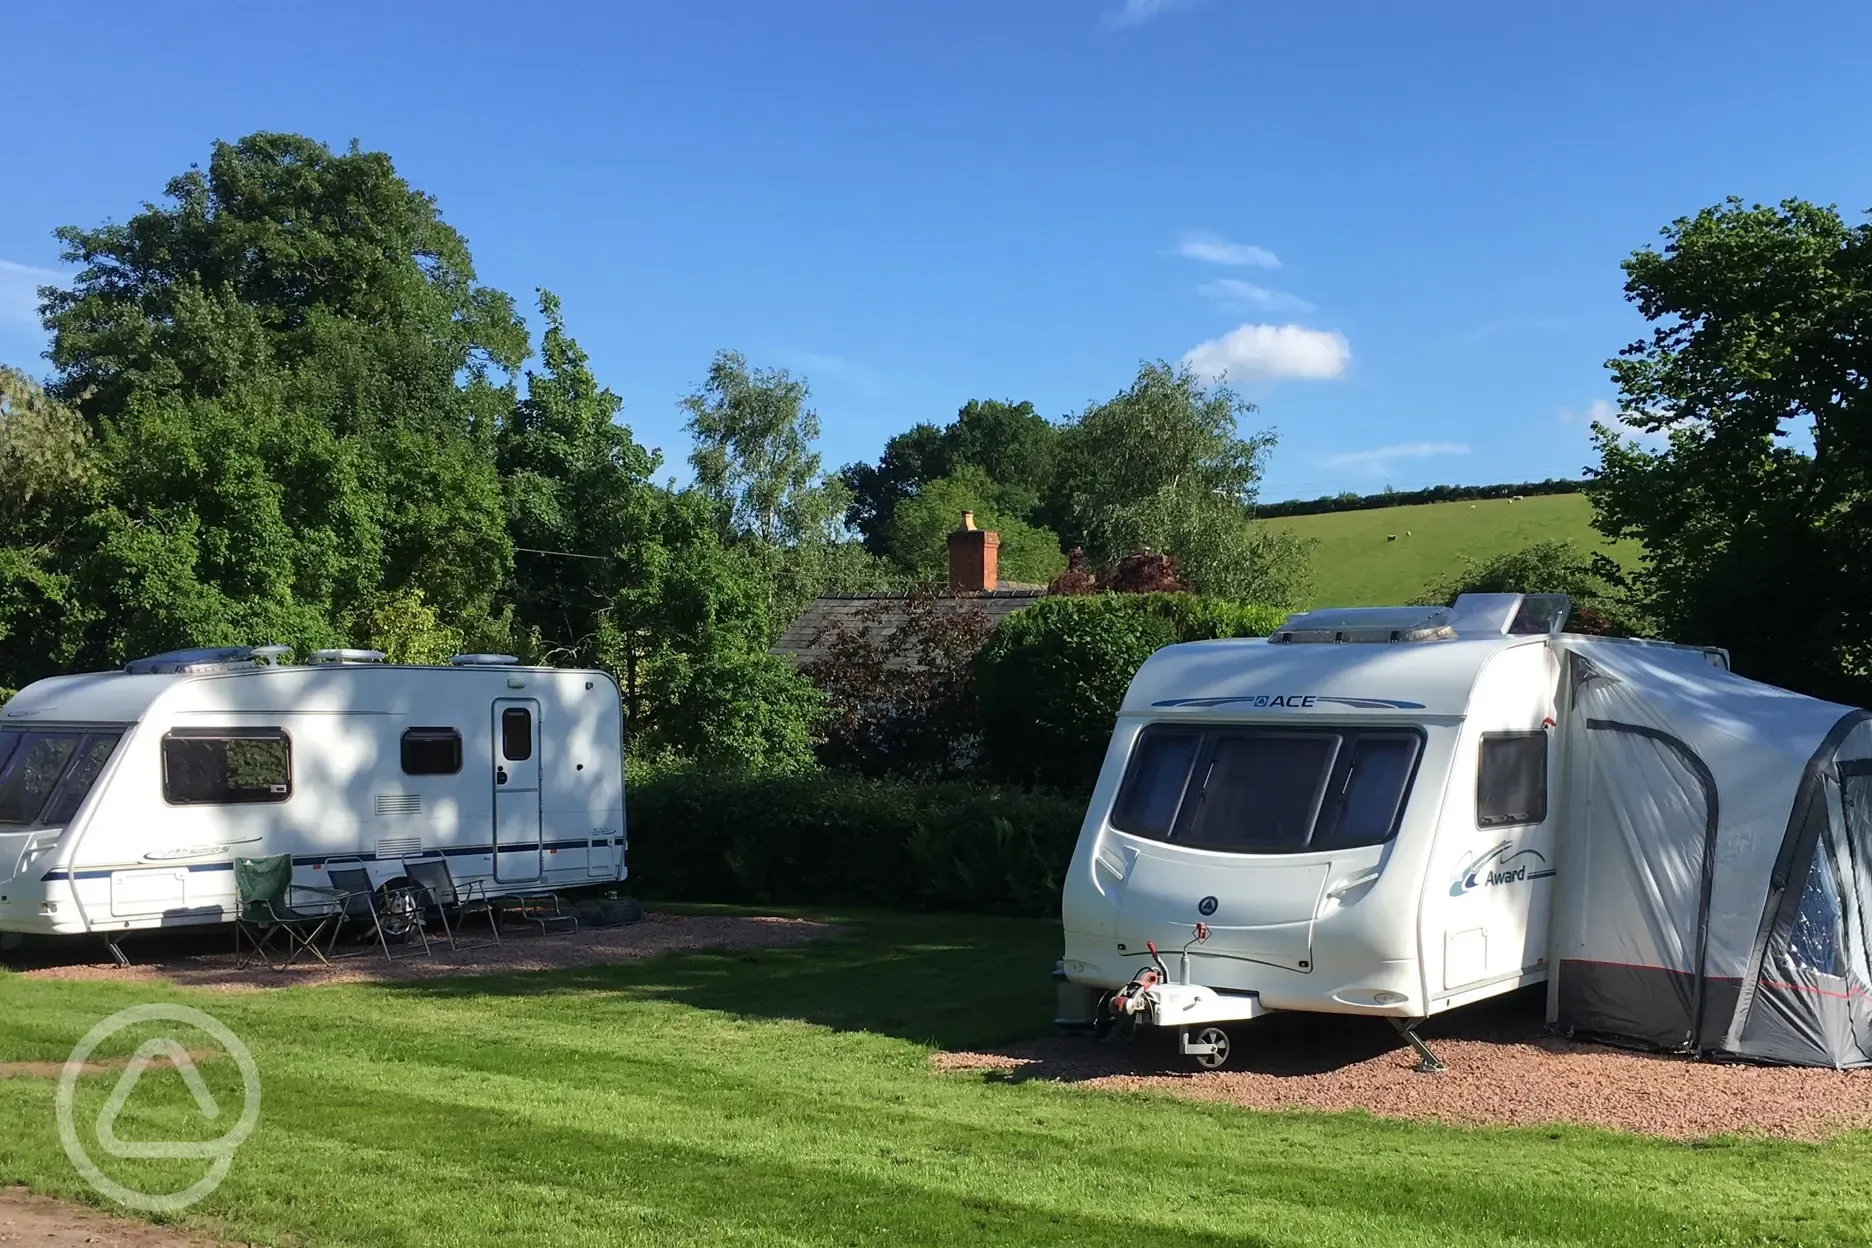 Standard grass gravel pitch Church Cottage Caravan and Camping